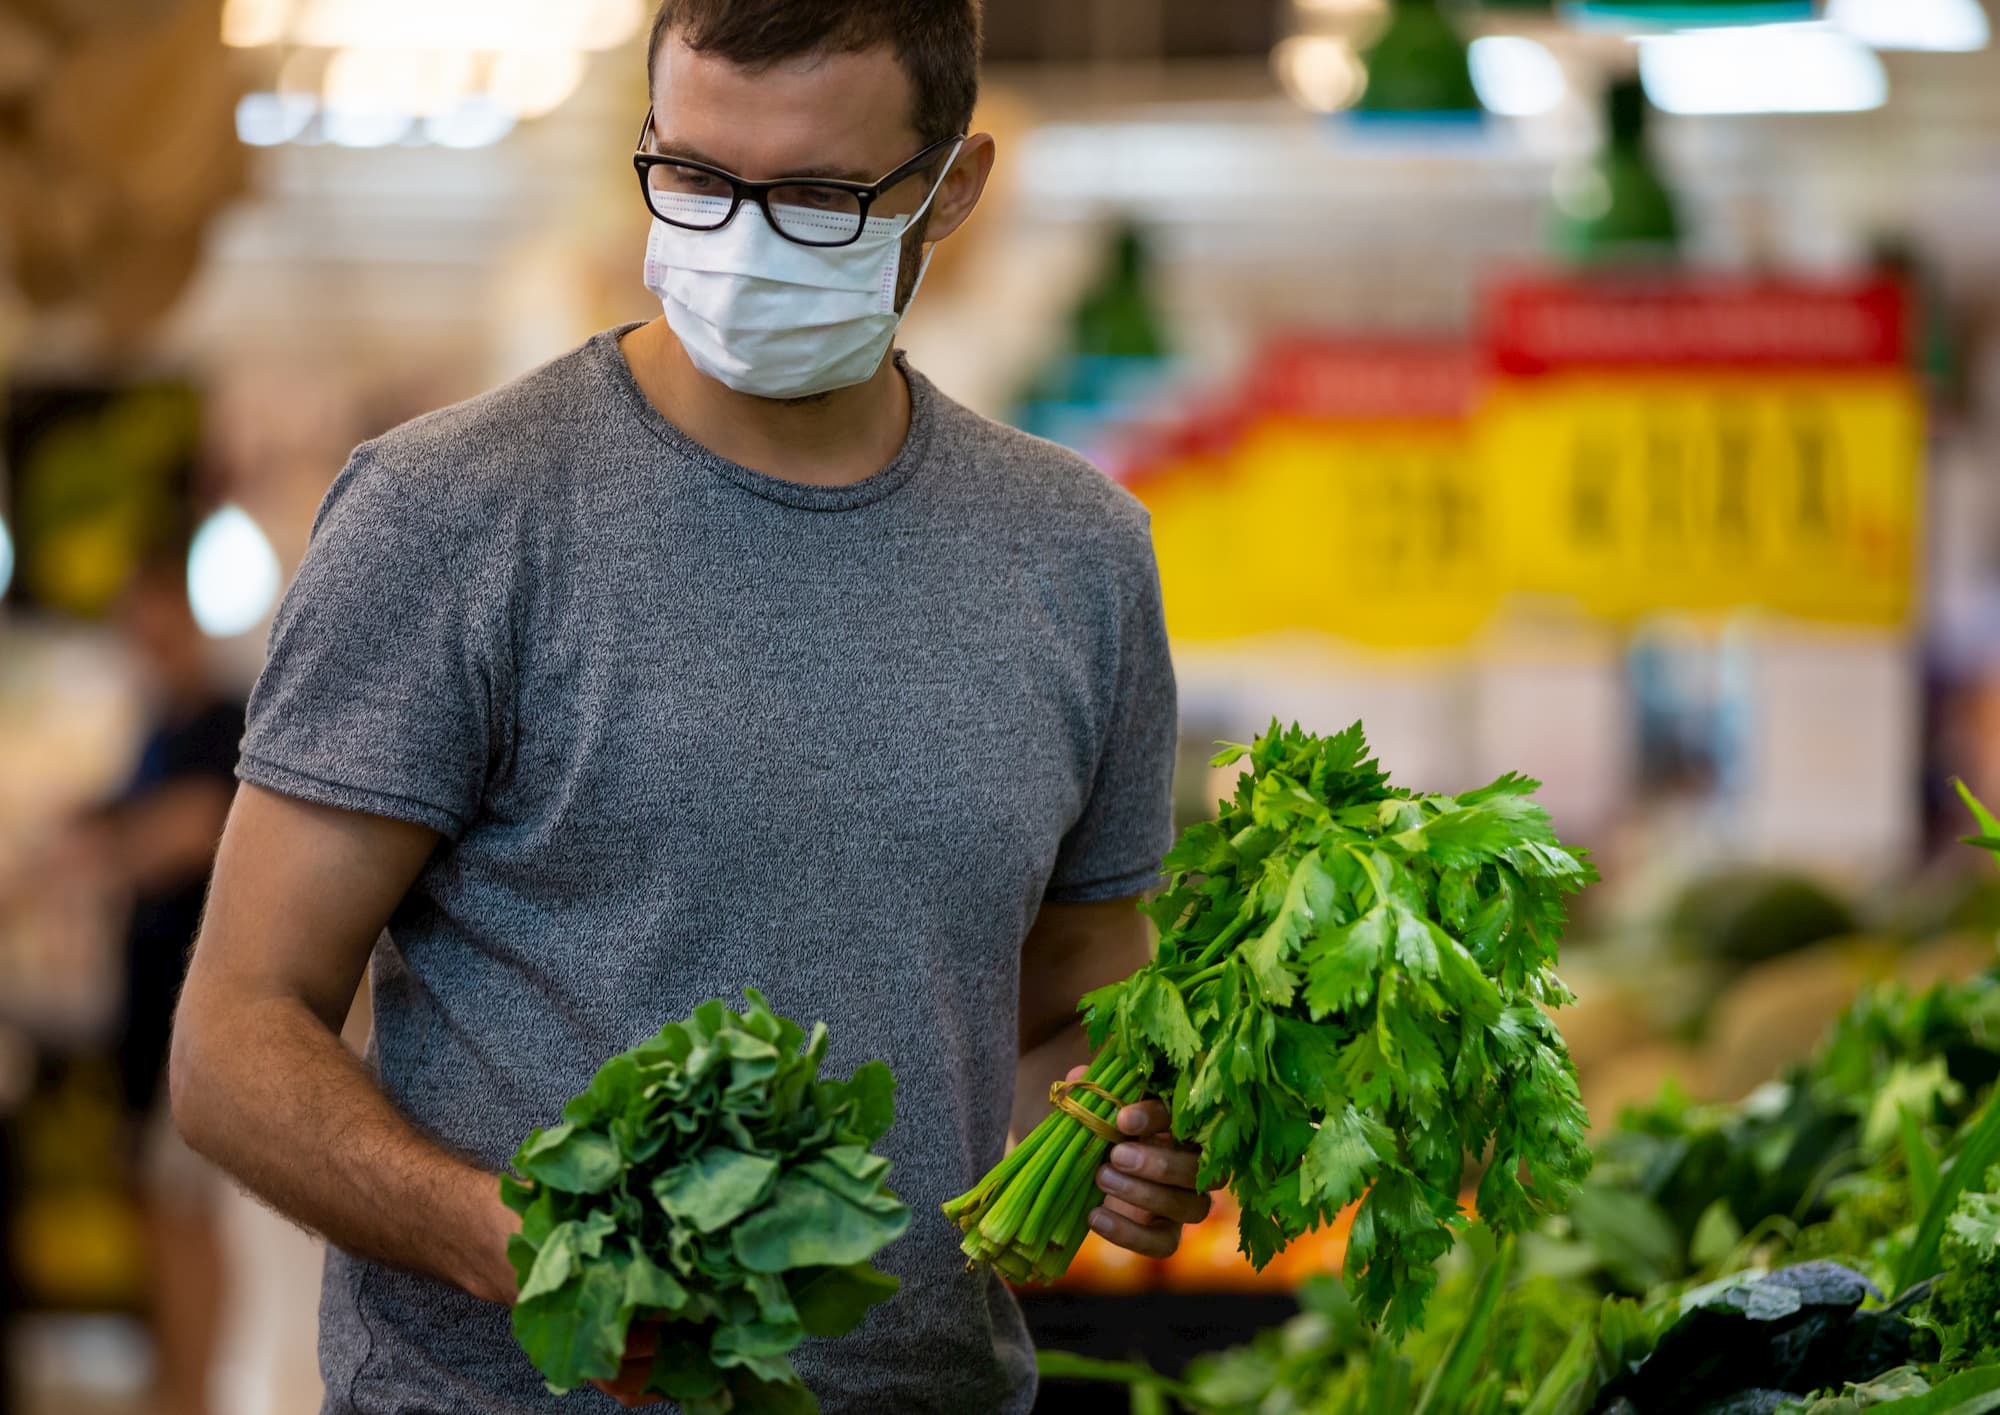 Man grocery shopping while wearing a mask